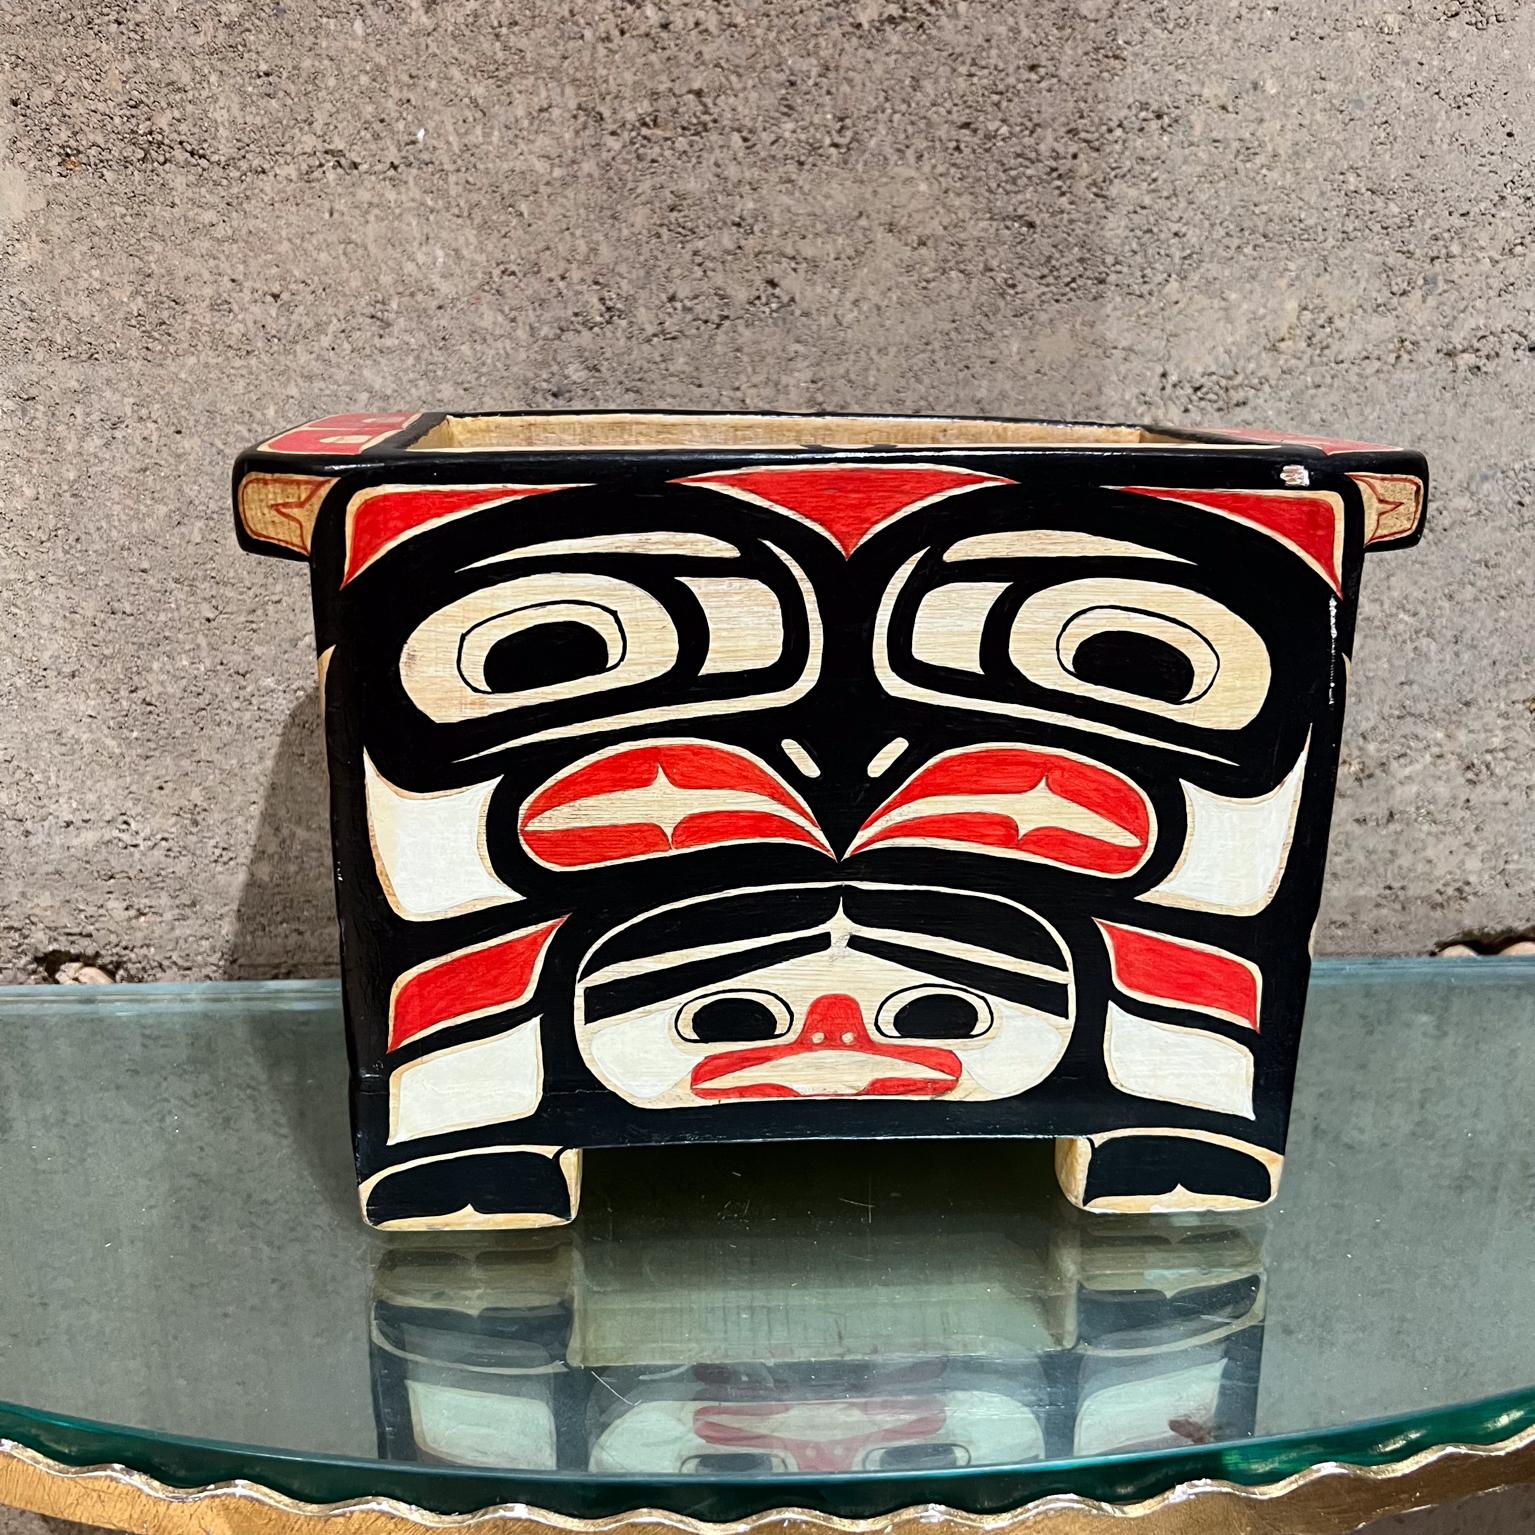 1992 Alaska Native Bentwood Box
Spakwus Eagle 
Red and Black Native Nations
Yellow Cedar
signed appears as David R Moore
dated art 92 August
10.75 x 5.38 d x 7.5 h
Preowned vintage condition Unrestored original.
Refer to all images please.